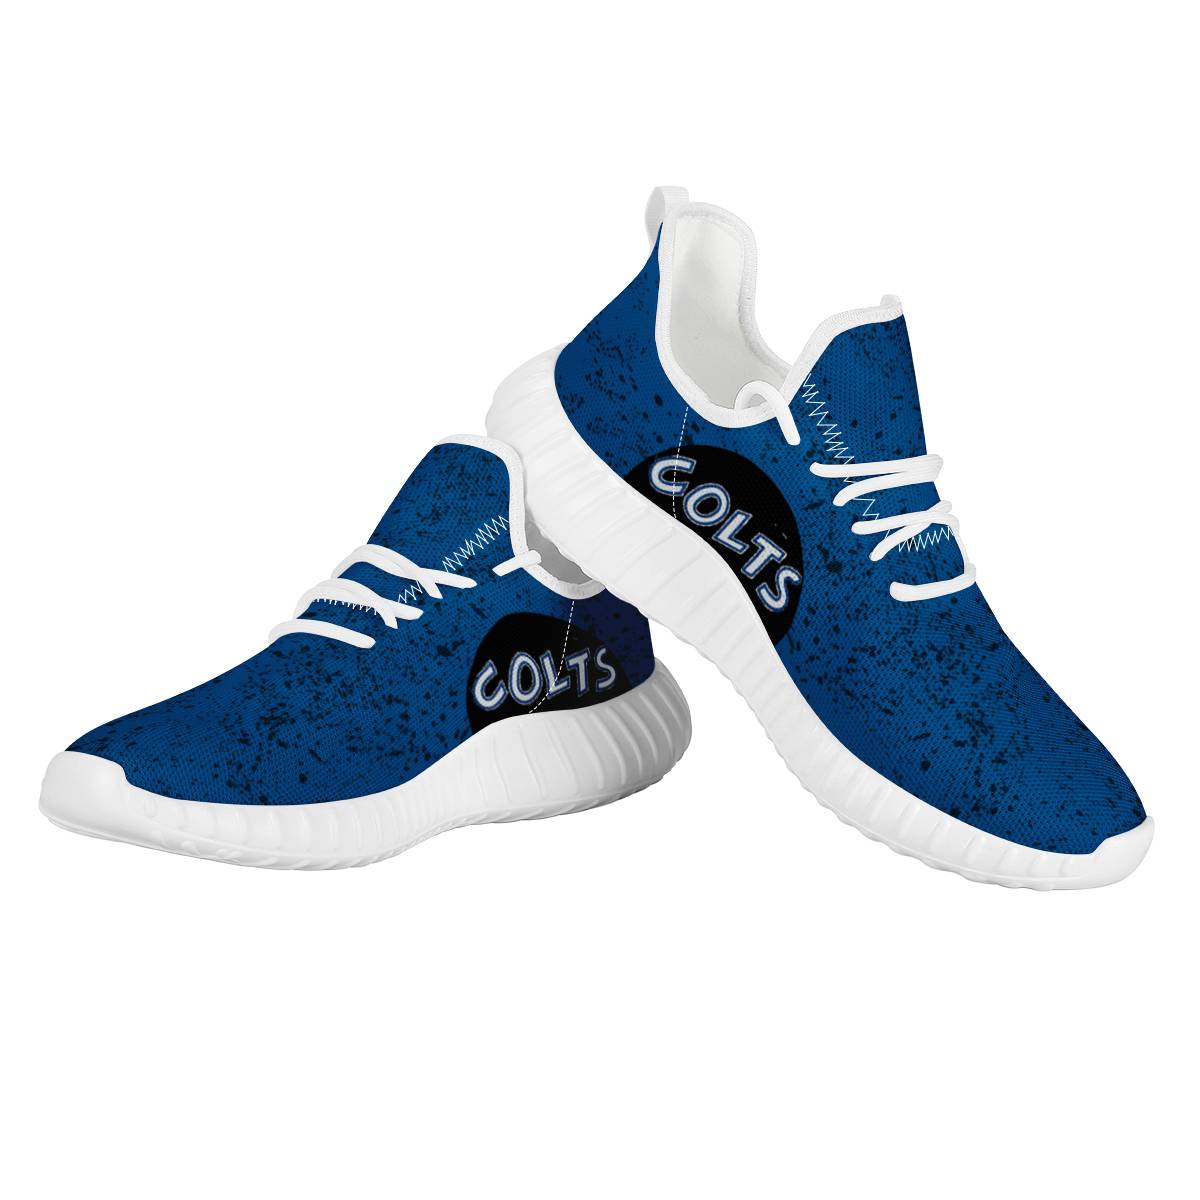 Men's Indianapolis Colts Mesh Knit Sneakers/Shoes 002